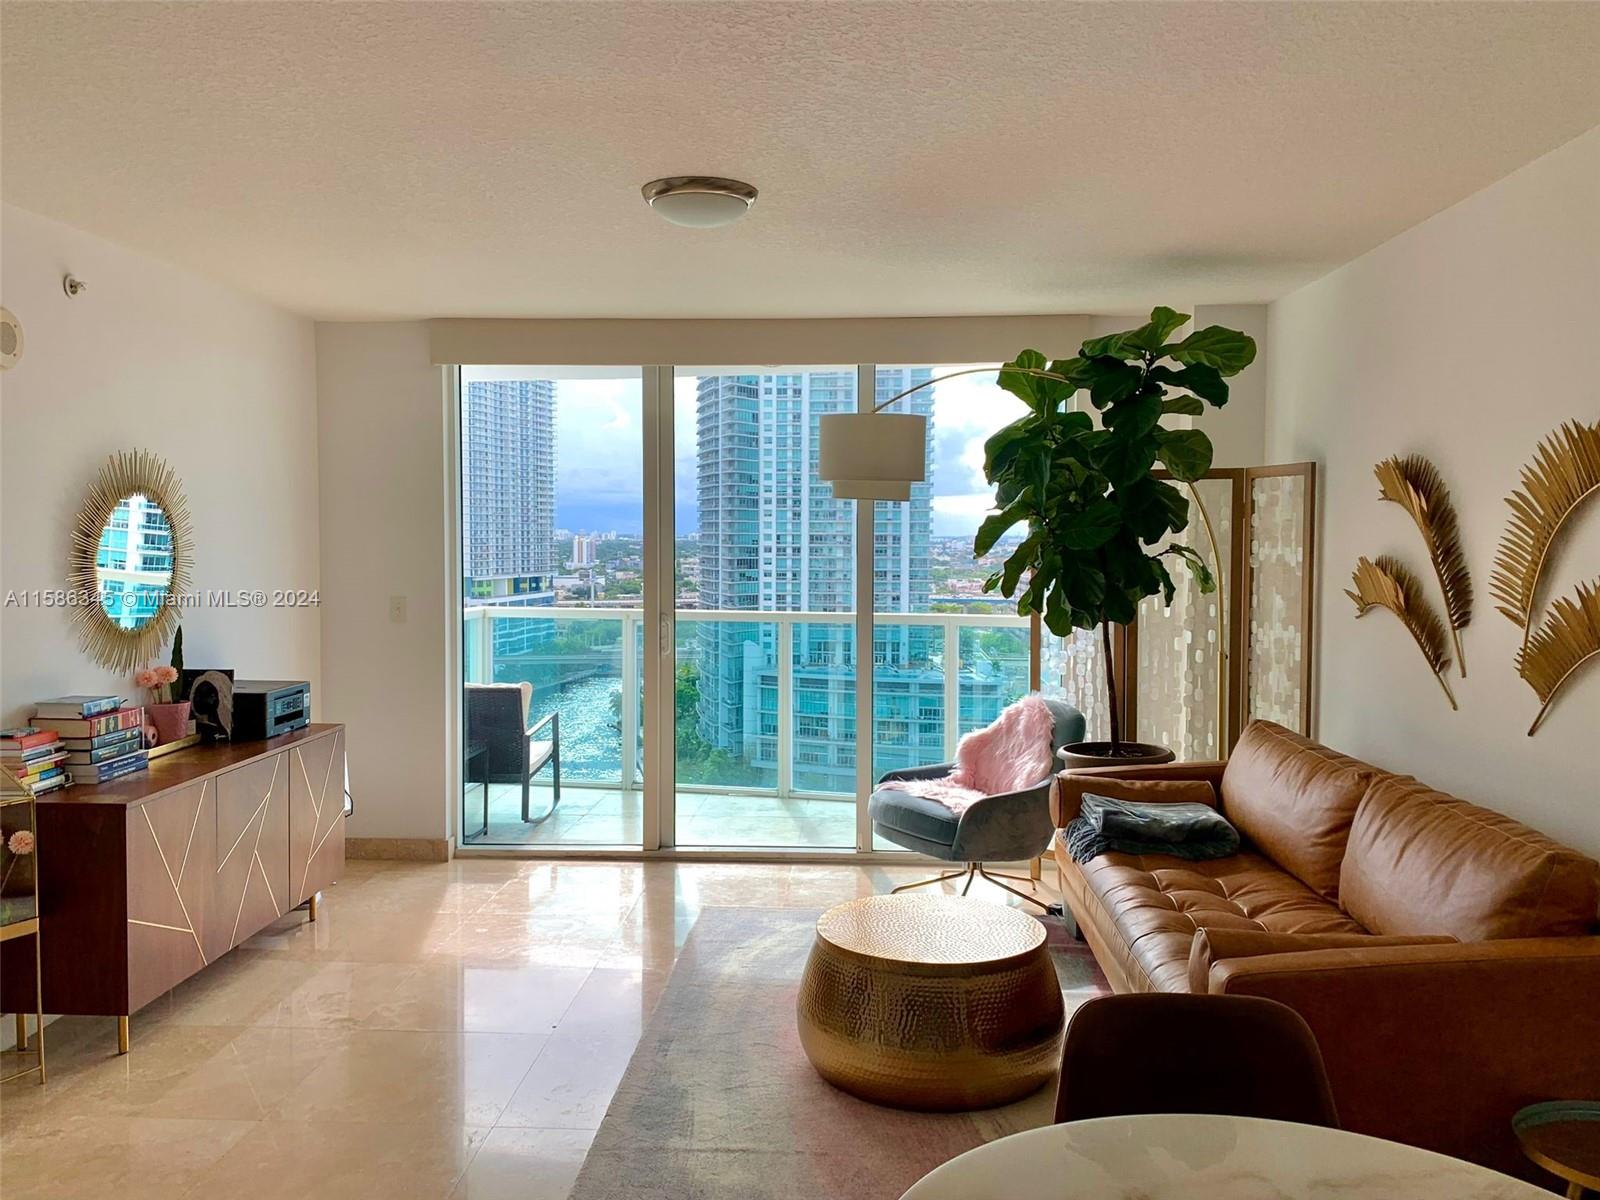 Experience luxurious urban living in this stunning one-bedroom unit perched on the 22nd floor, boasting breathtaking views of the river and city skyline. Embrace the convenience of a prime location in Brickell, with proximity to Brickell City Centre's vibrant shopping and dining scene. The spacious floor plan offers ample comfort, complemented by modern amenities including a multi-level gym, jacuzzi, pool, and 24-hour valet and concierge services. Plus, enjoy the convenience of assigned garage parking. Elevate your lifestyle with this captivating residence, where every day is filled with elegance and convenience.